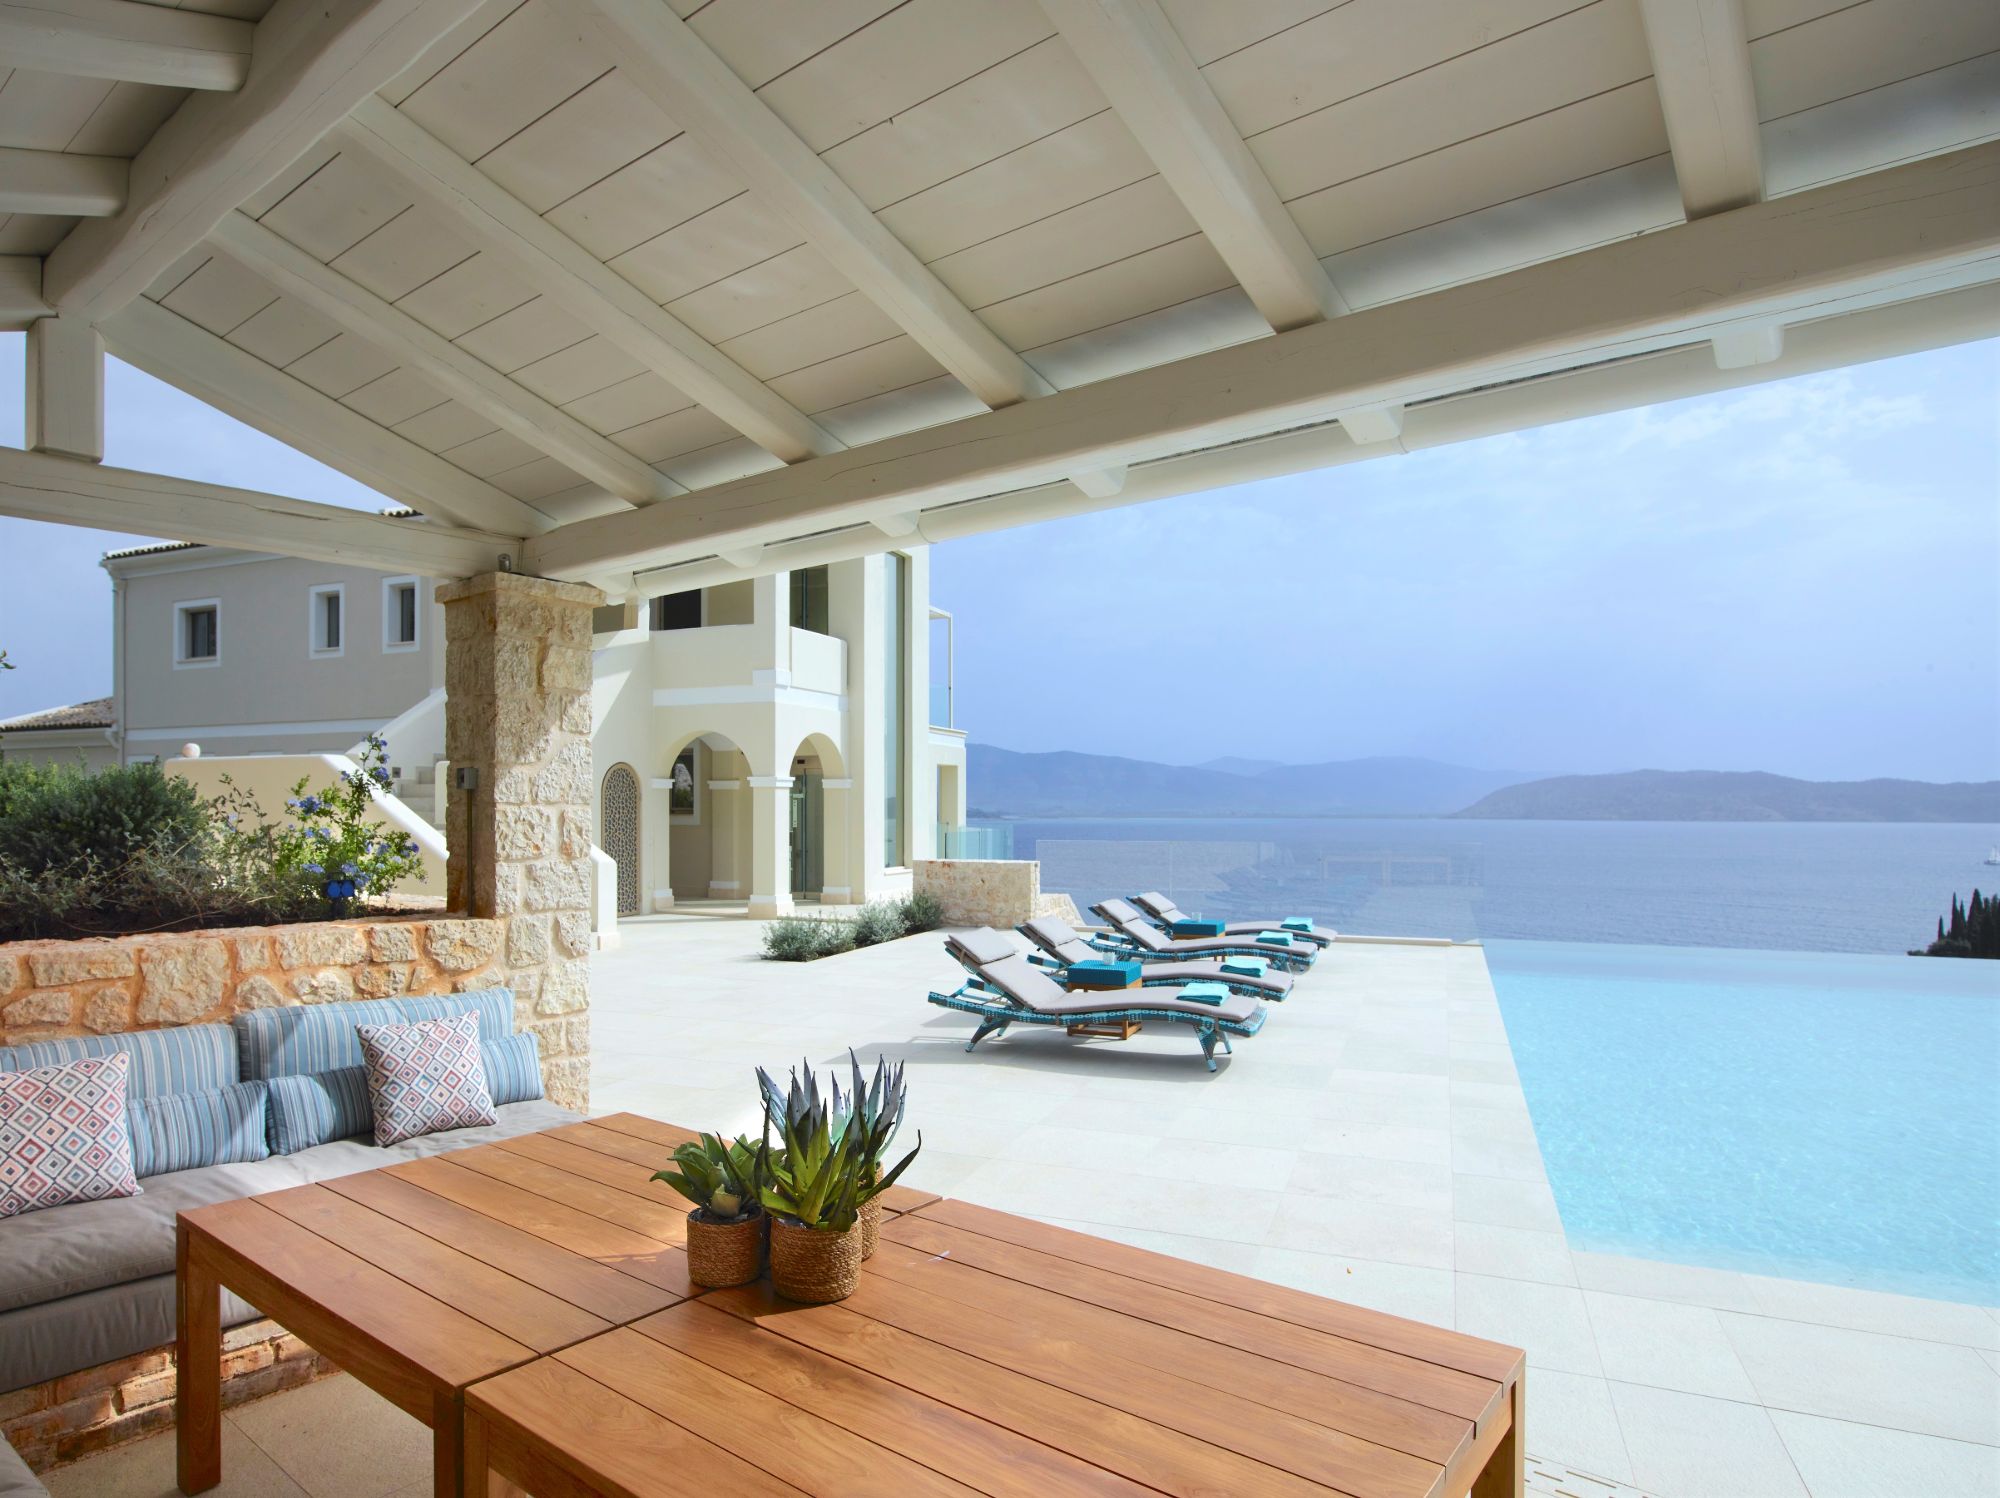 Pool and outdoor seating area at Villa Leonidas